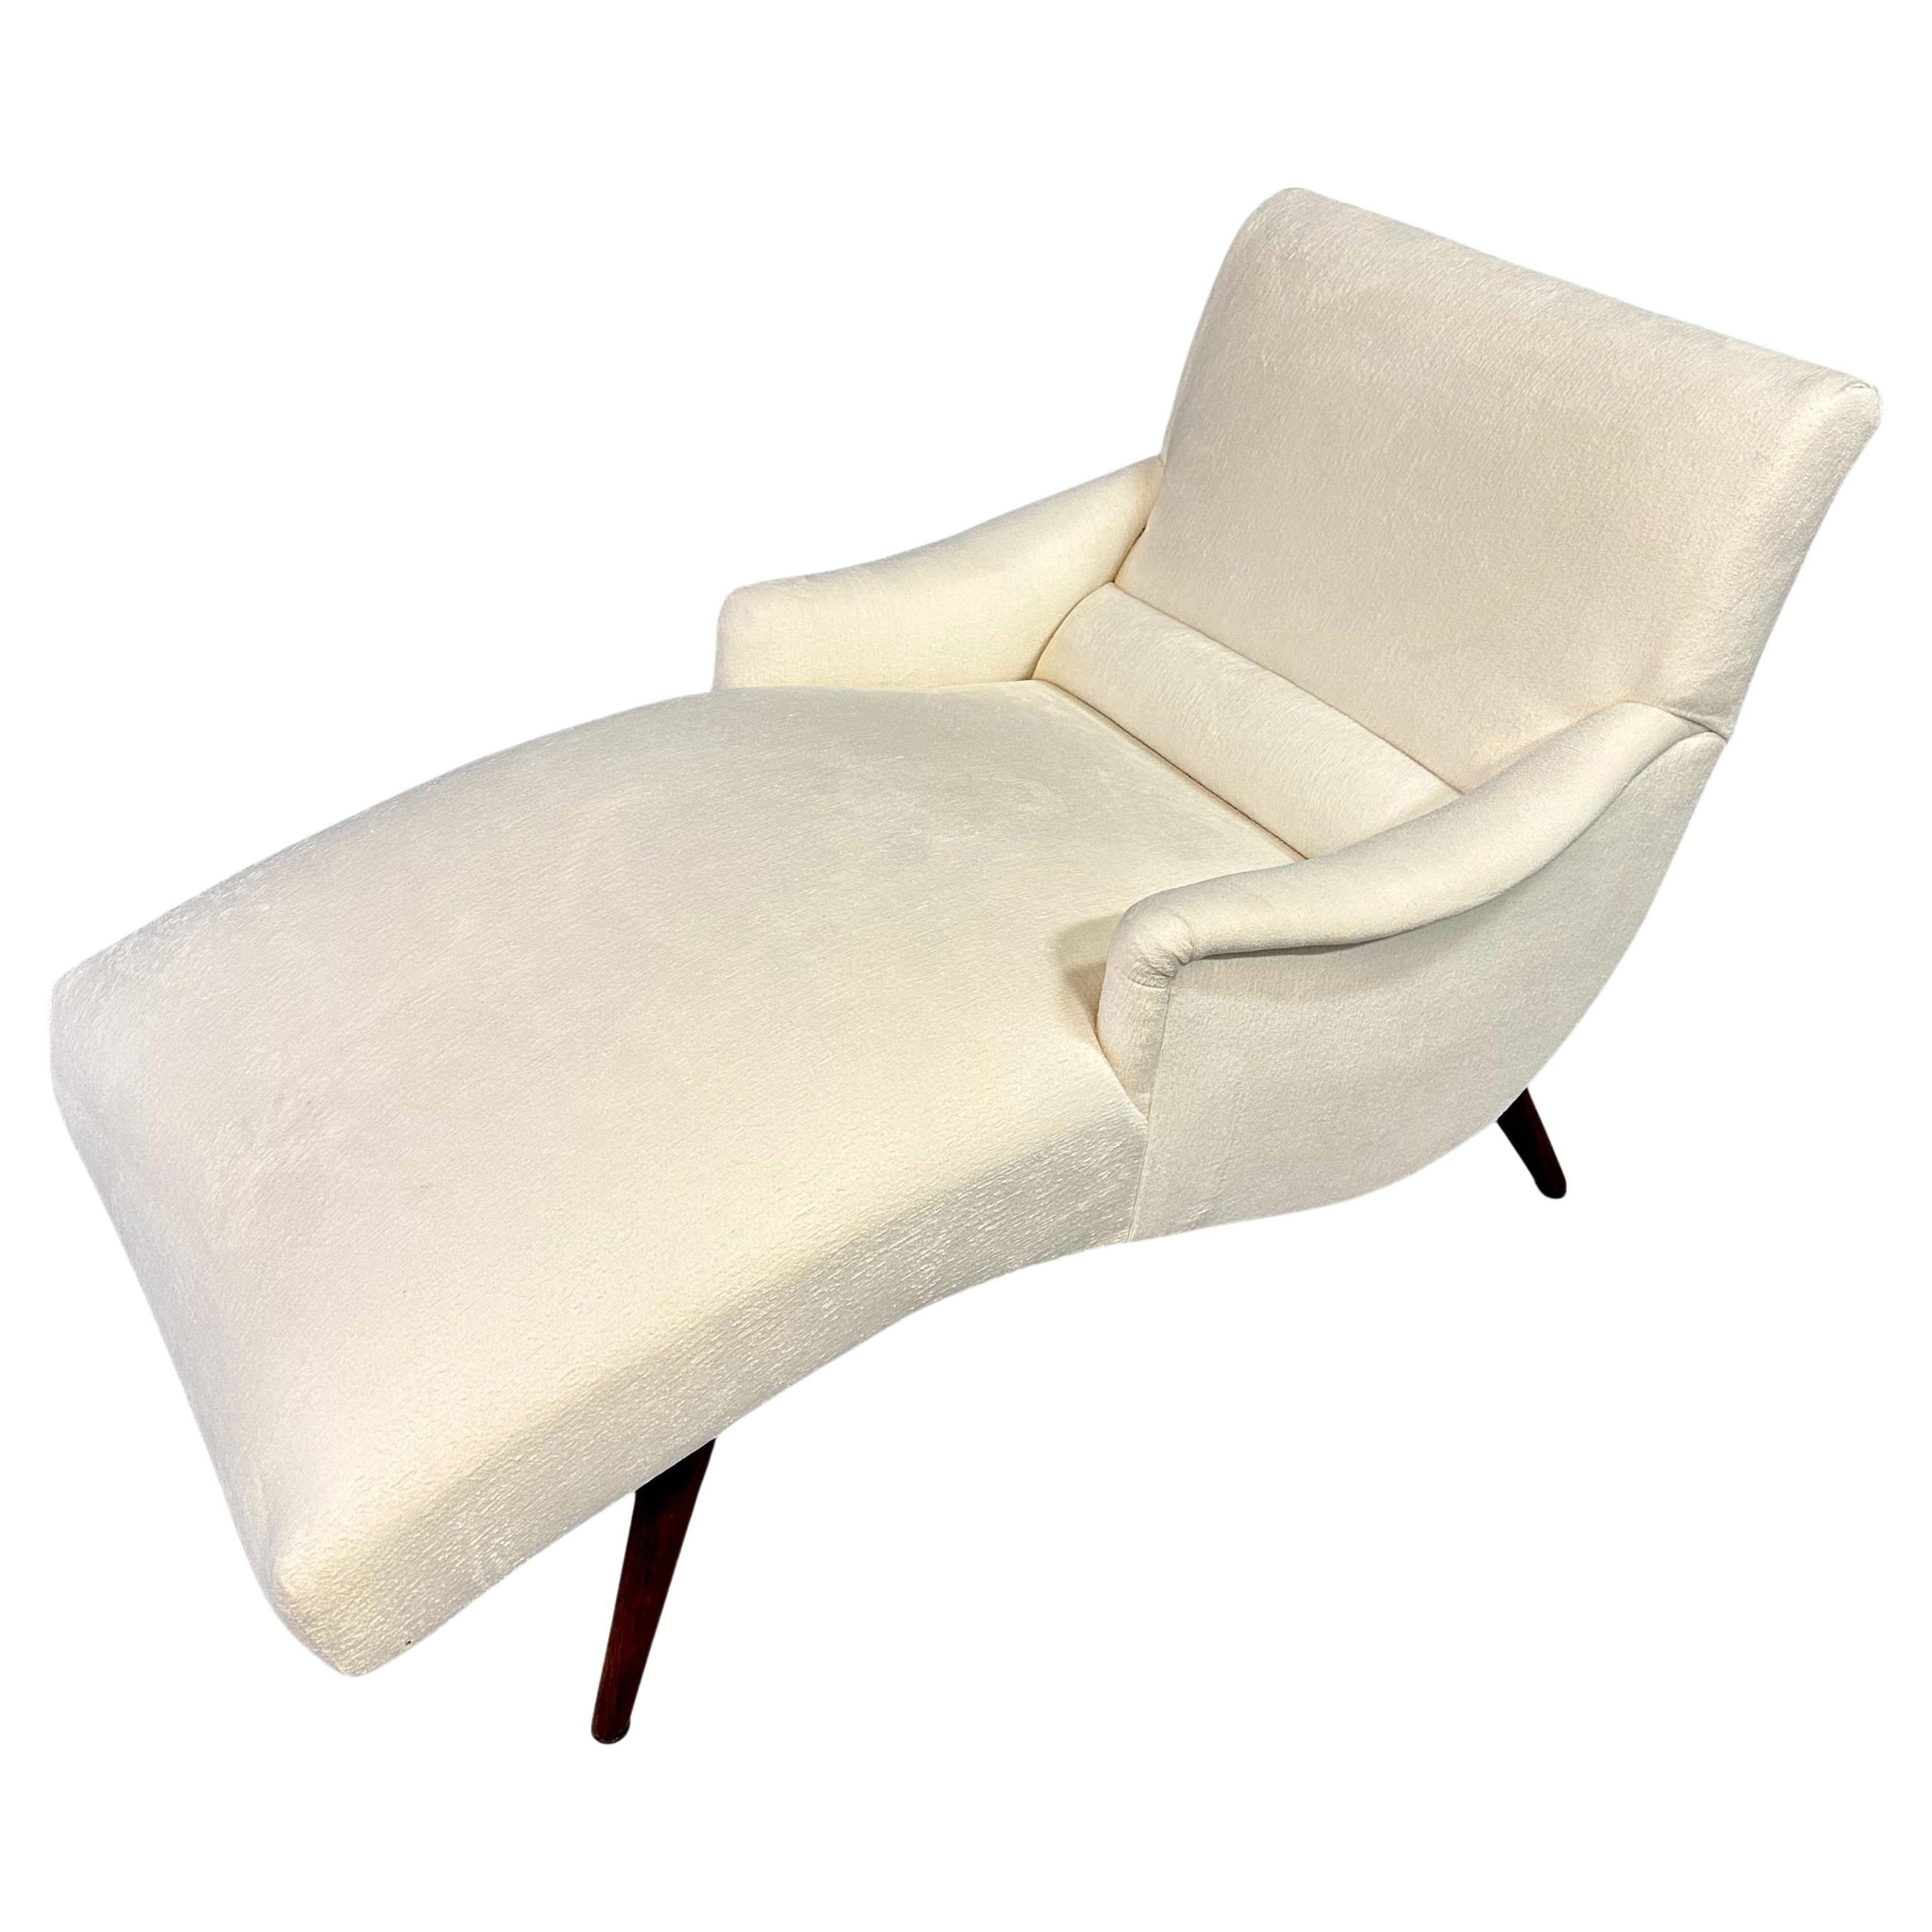 Mid-Century Modern Chaise Lounge Chair by Lawrence Peabody